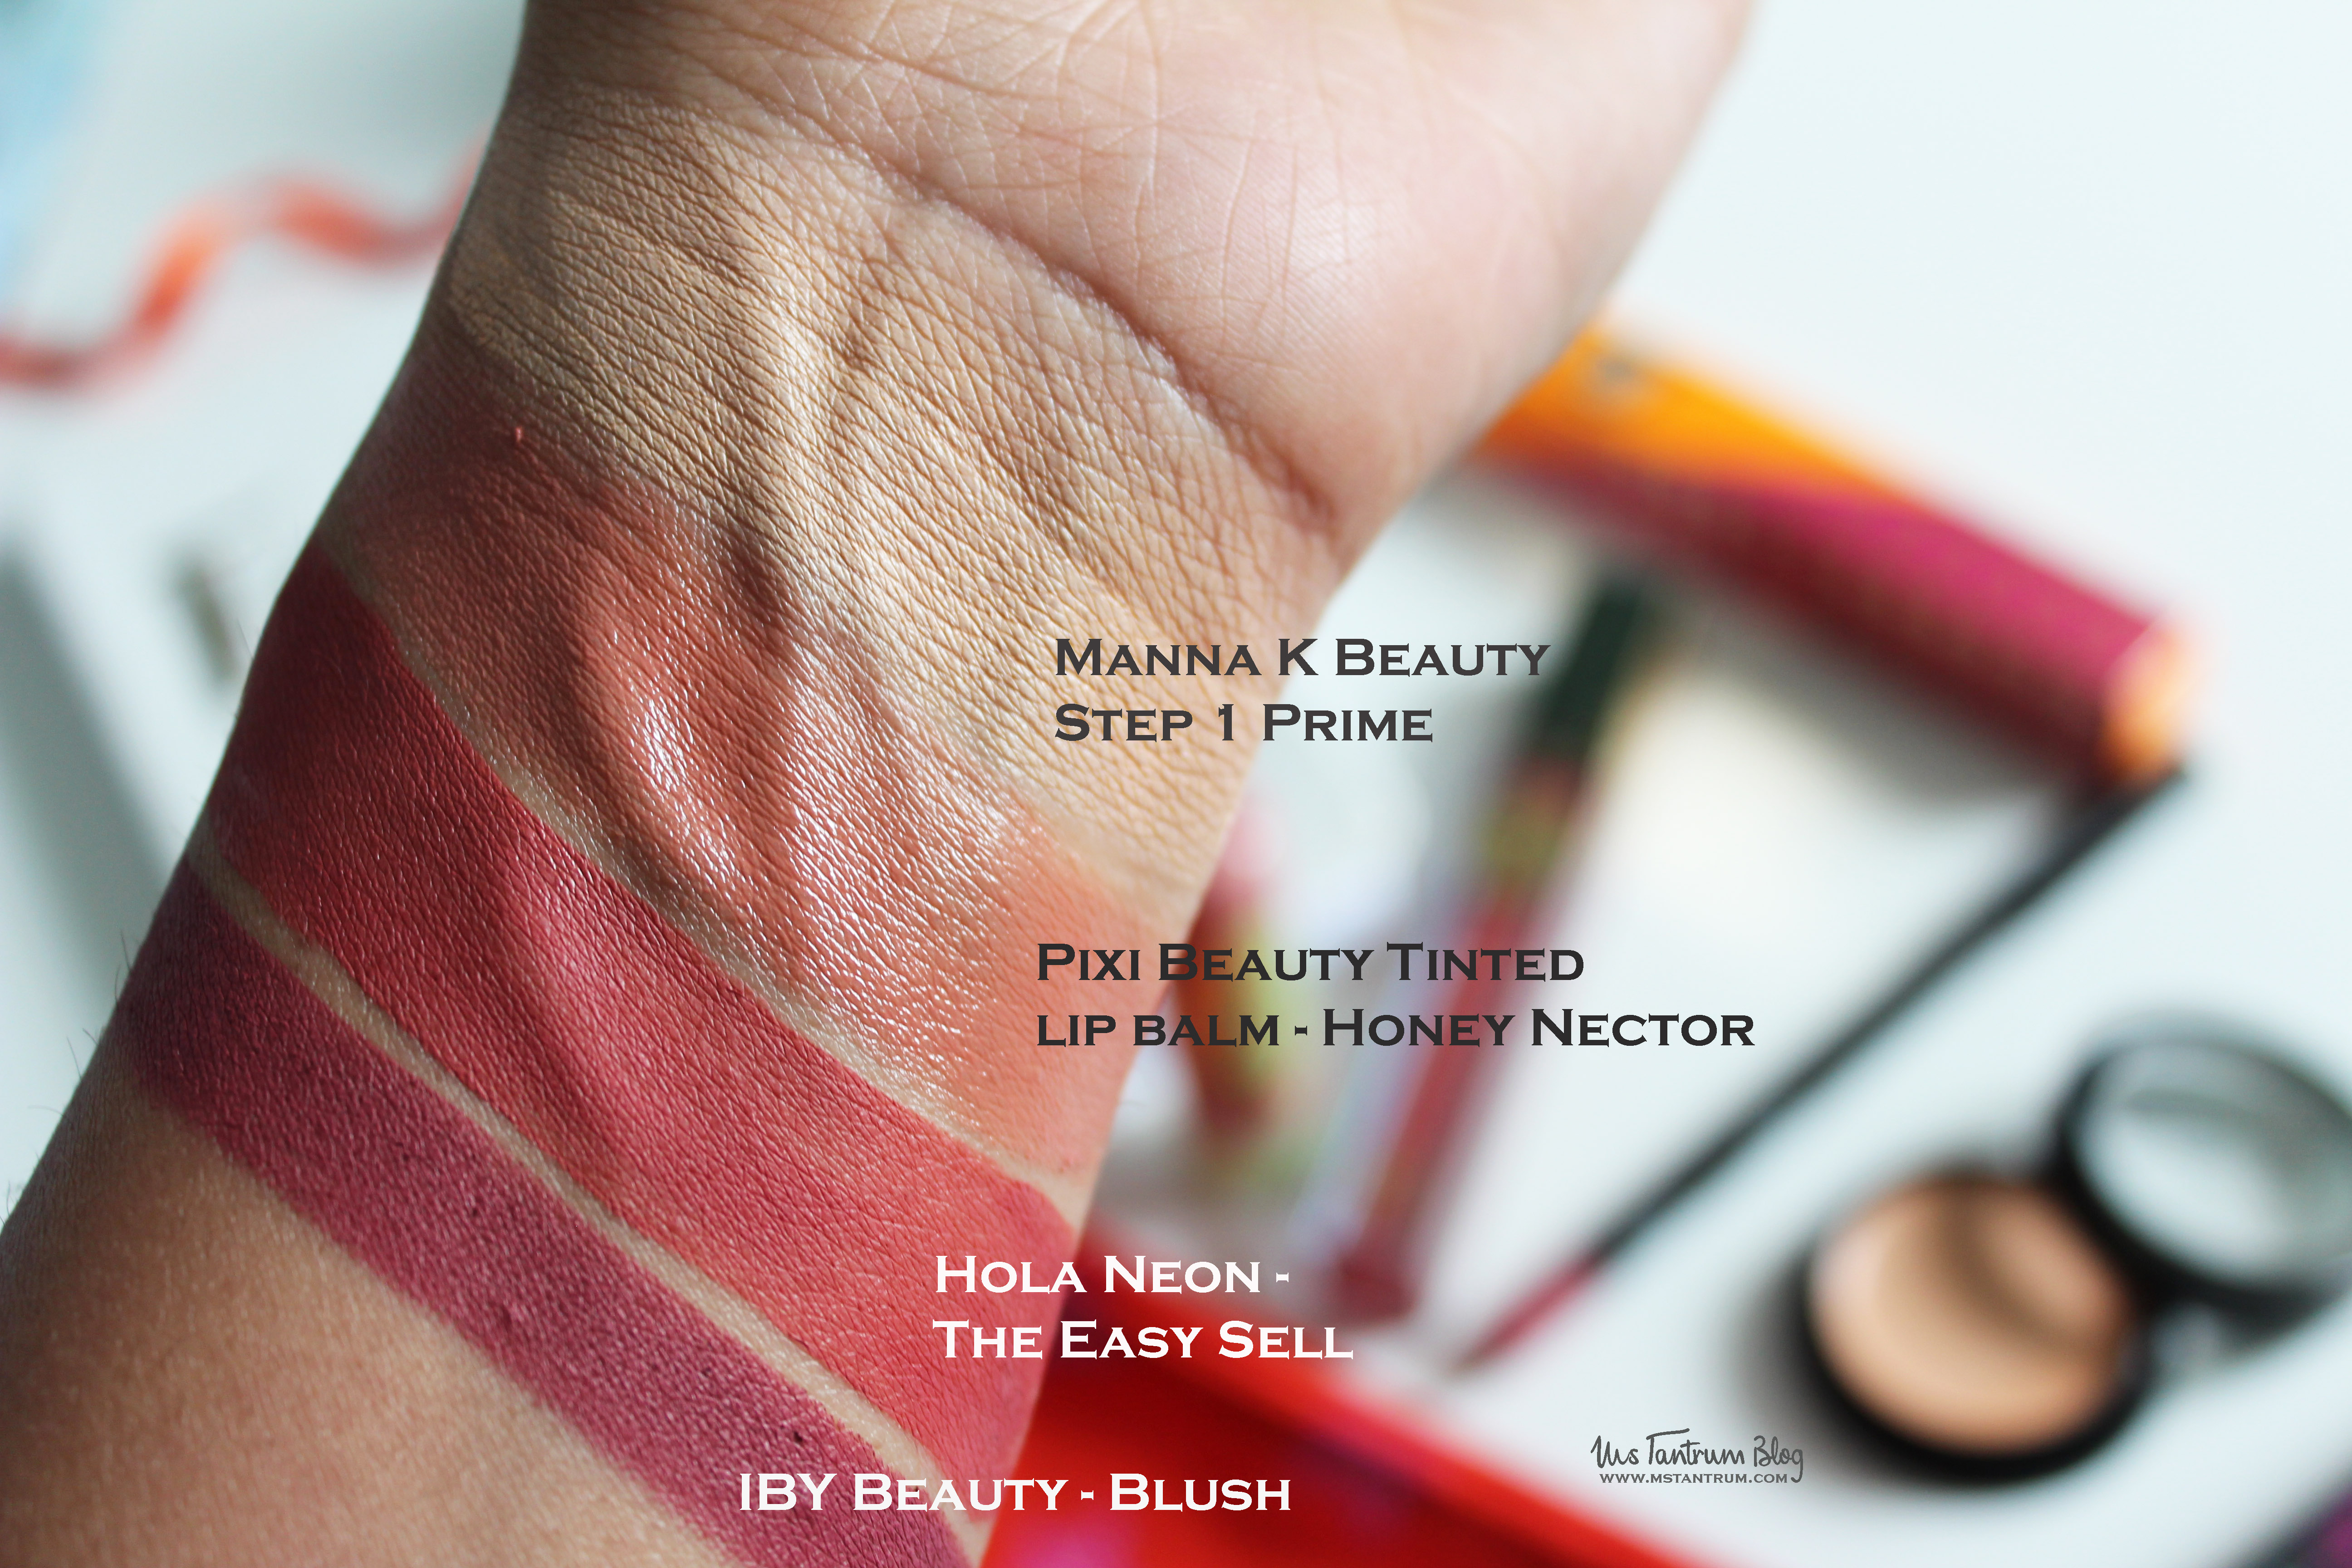 Lip Monthly swatches - Manna K step 1 prime, pixi beauty tinted lip balm - honey nectar, hola neon - The Easy Sell, Iby Beauty - Blush